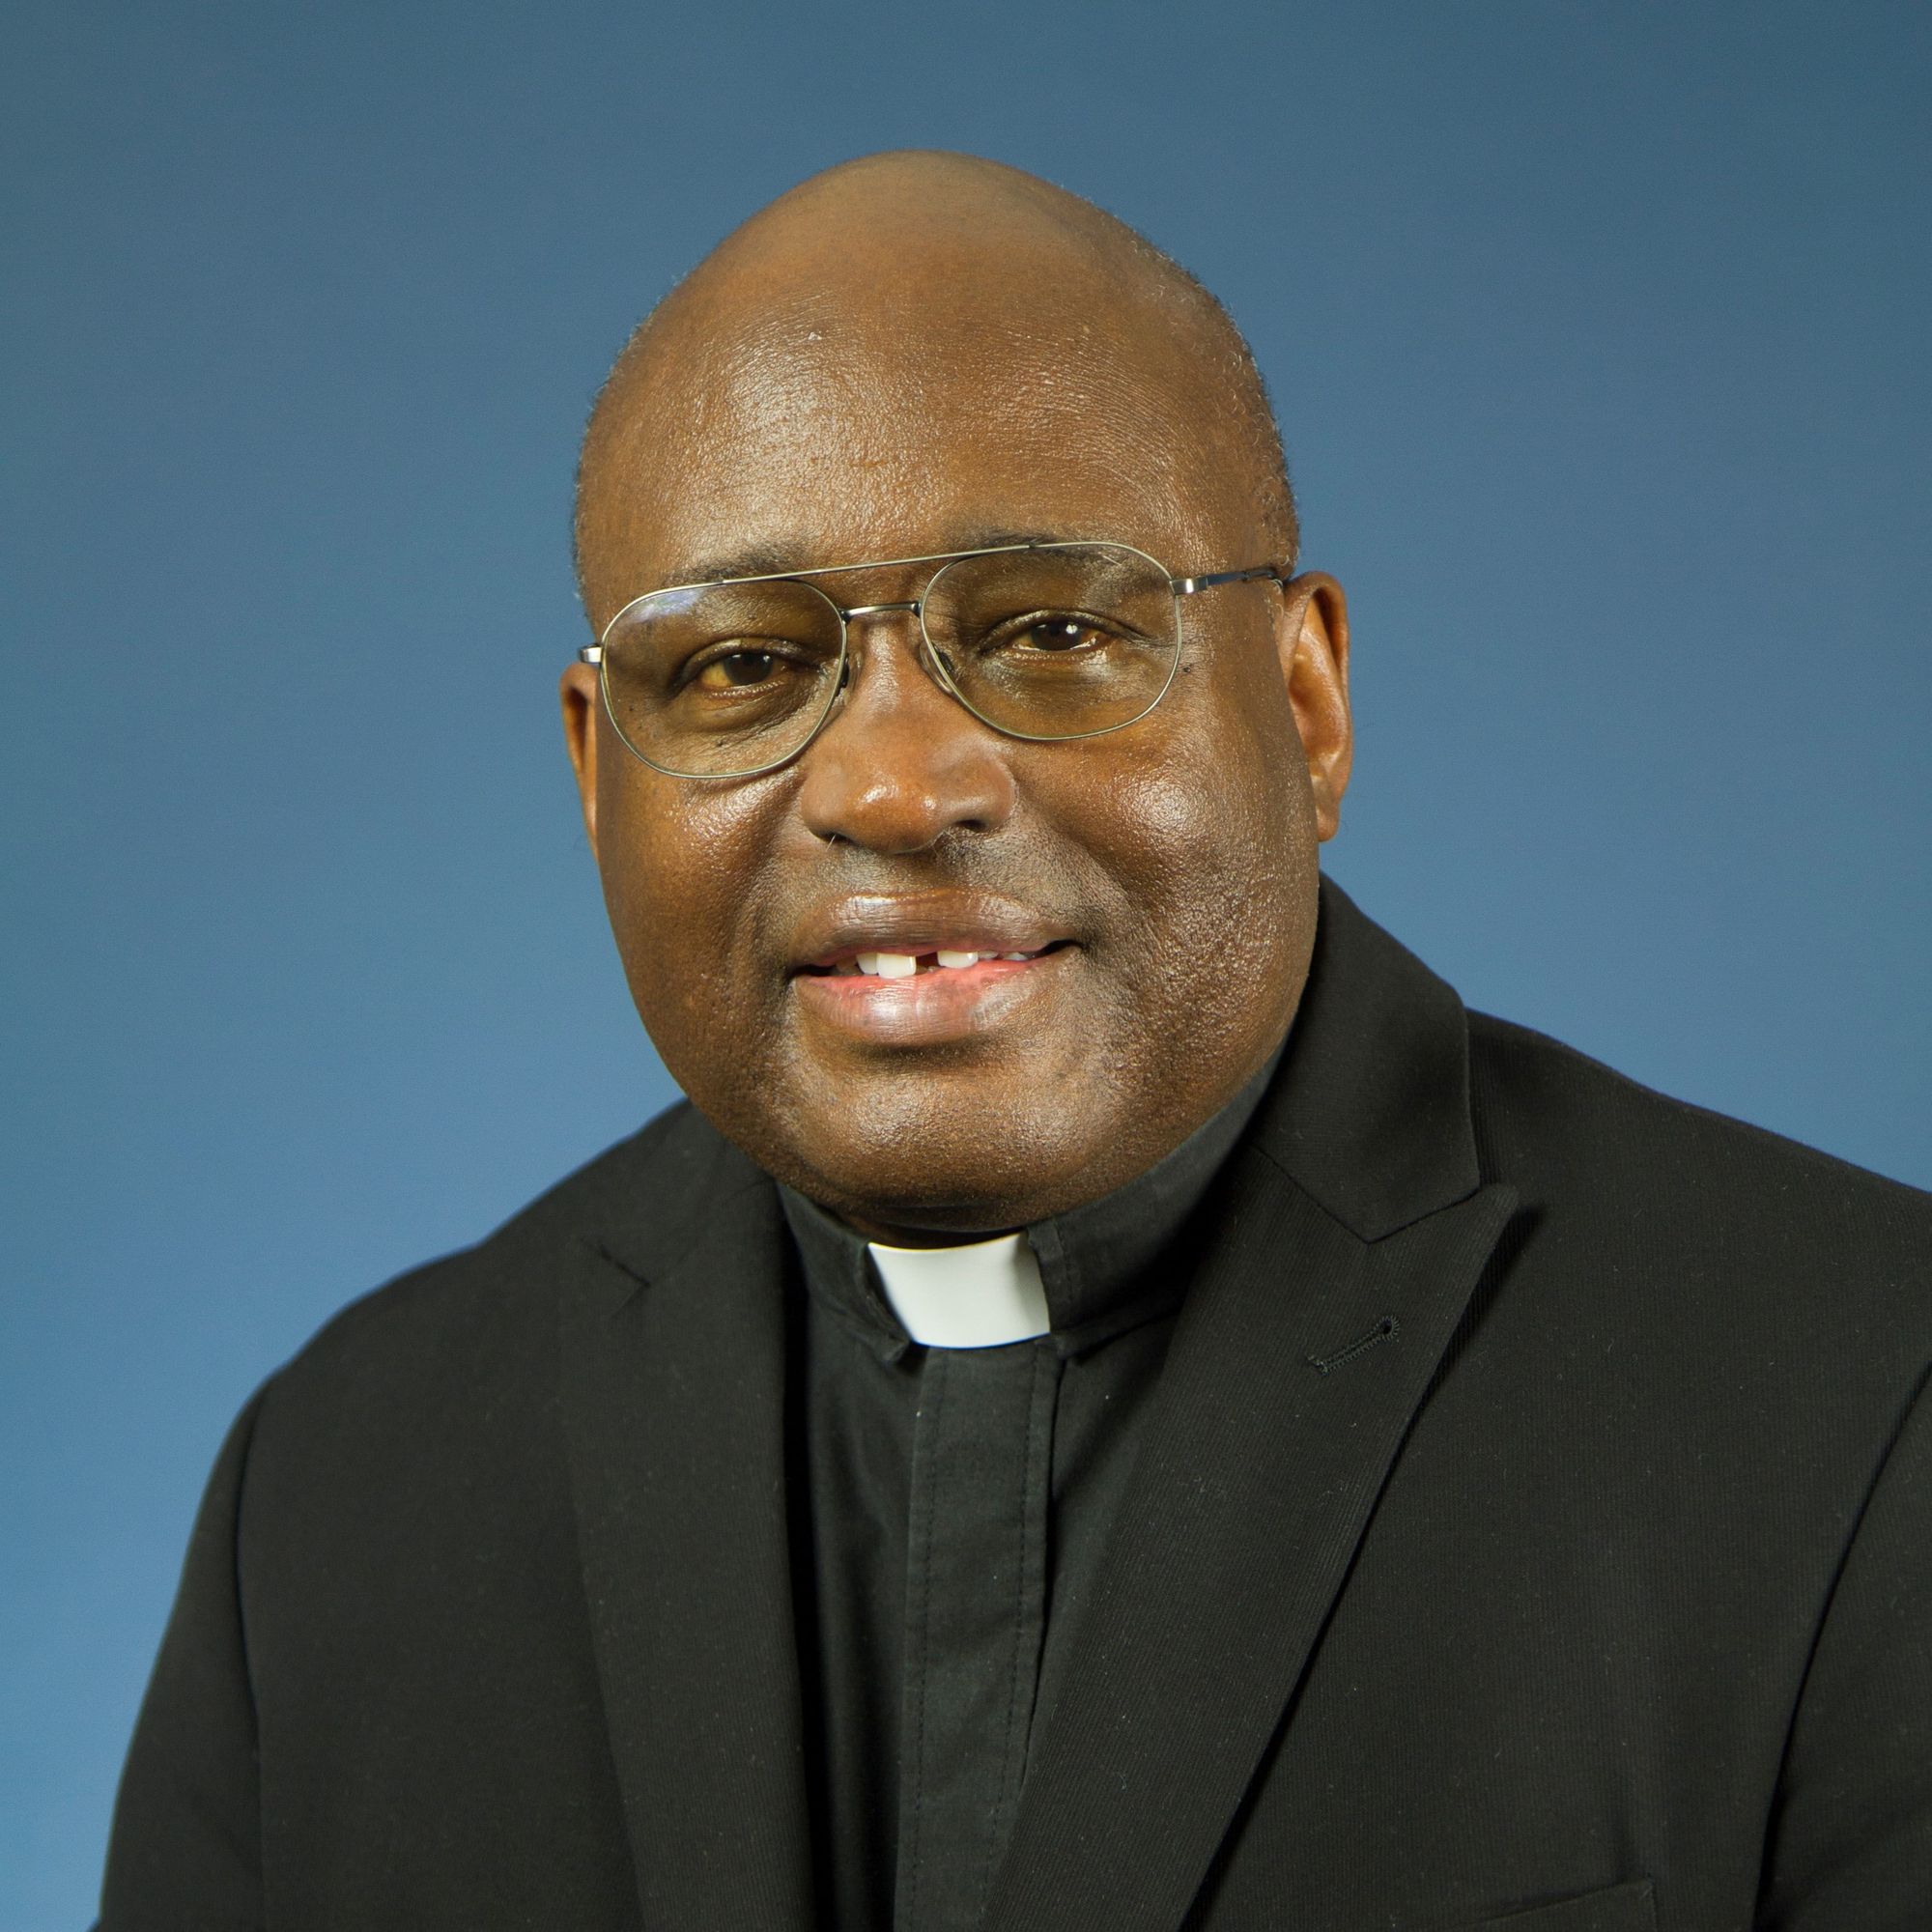 New Black monsignor named by Pope Francis